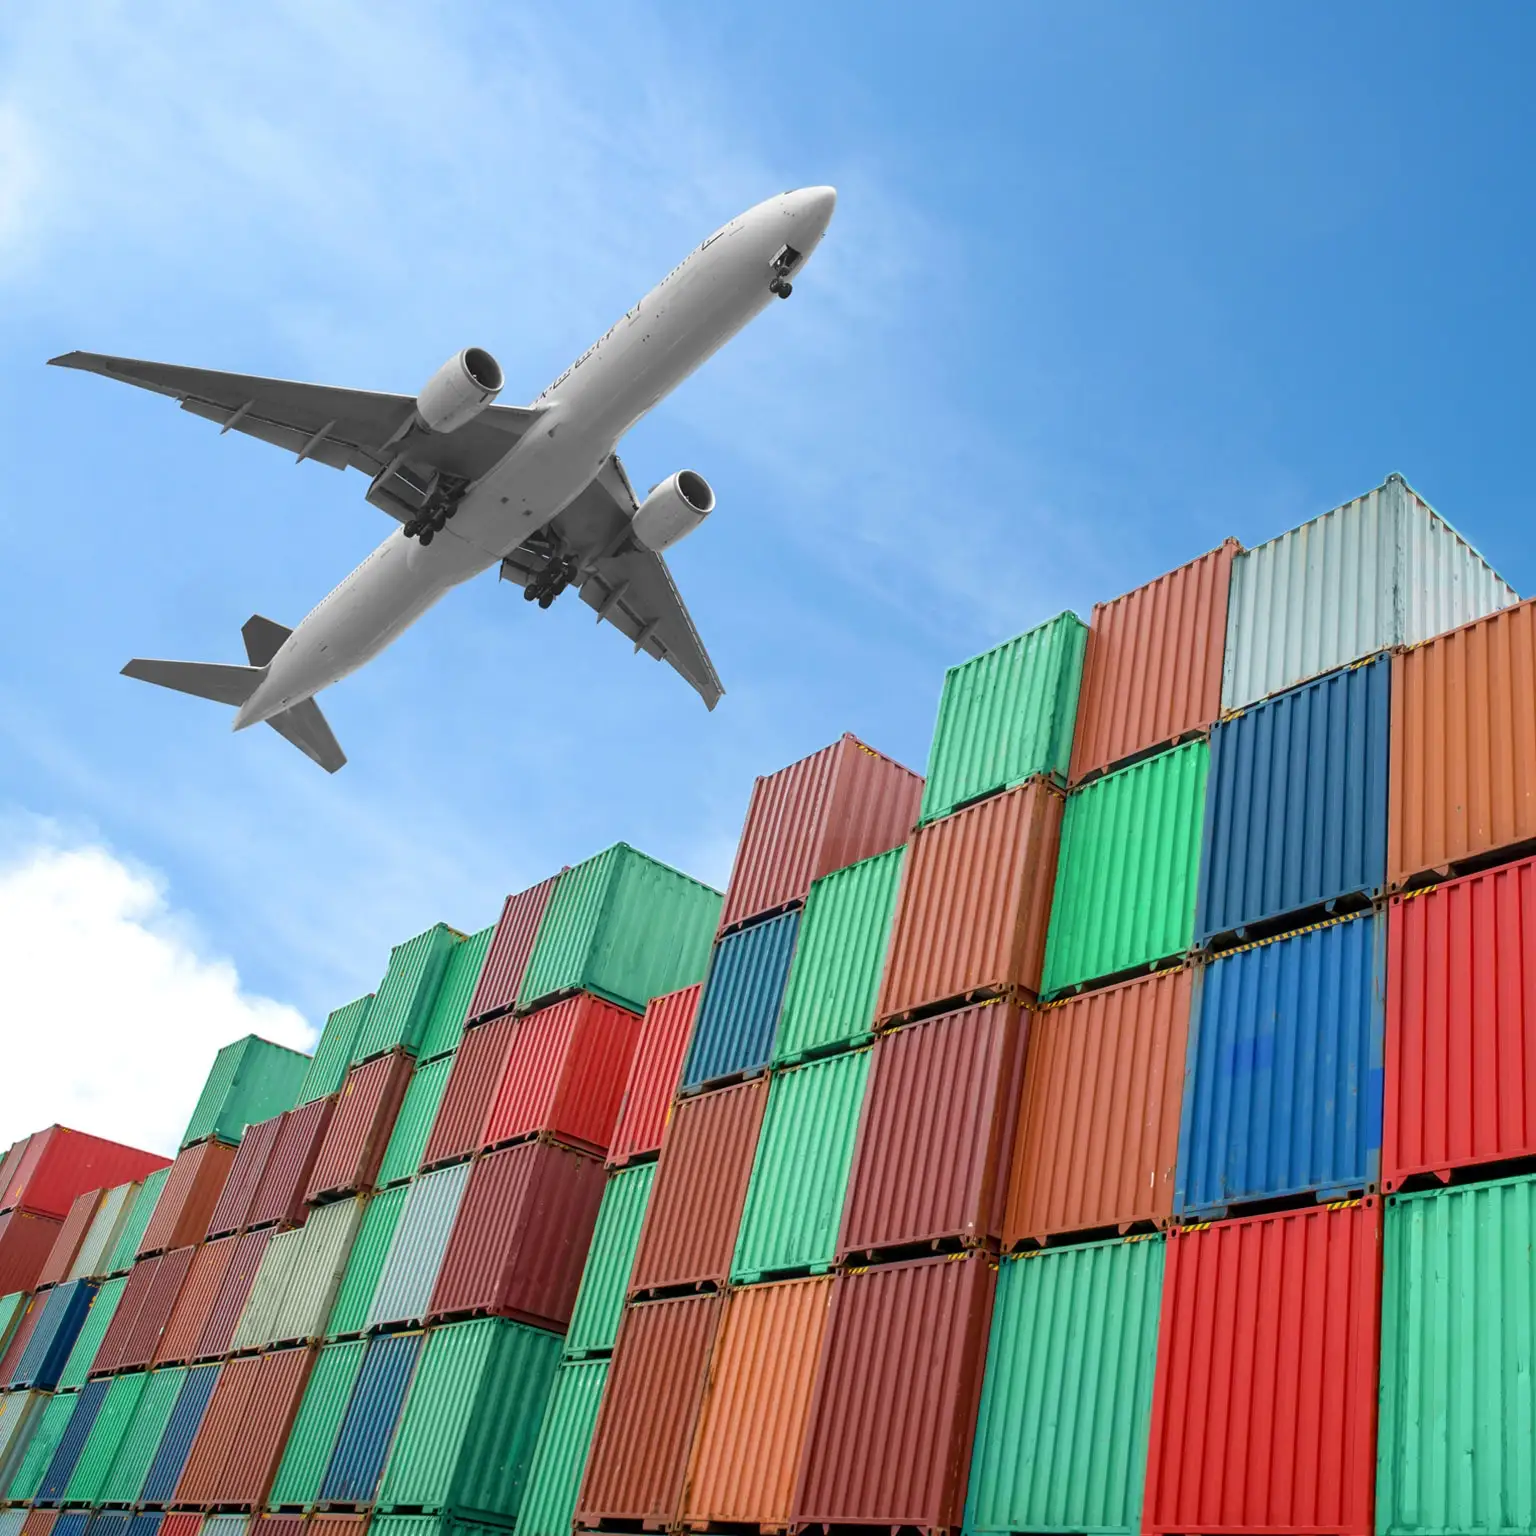 SP container courier service air shipping from China to usa/uk/europe/canada Australia cheap air freight from china